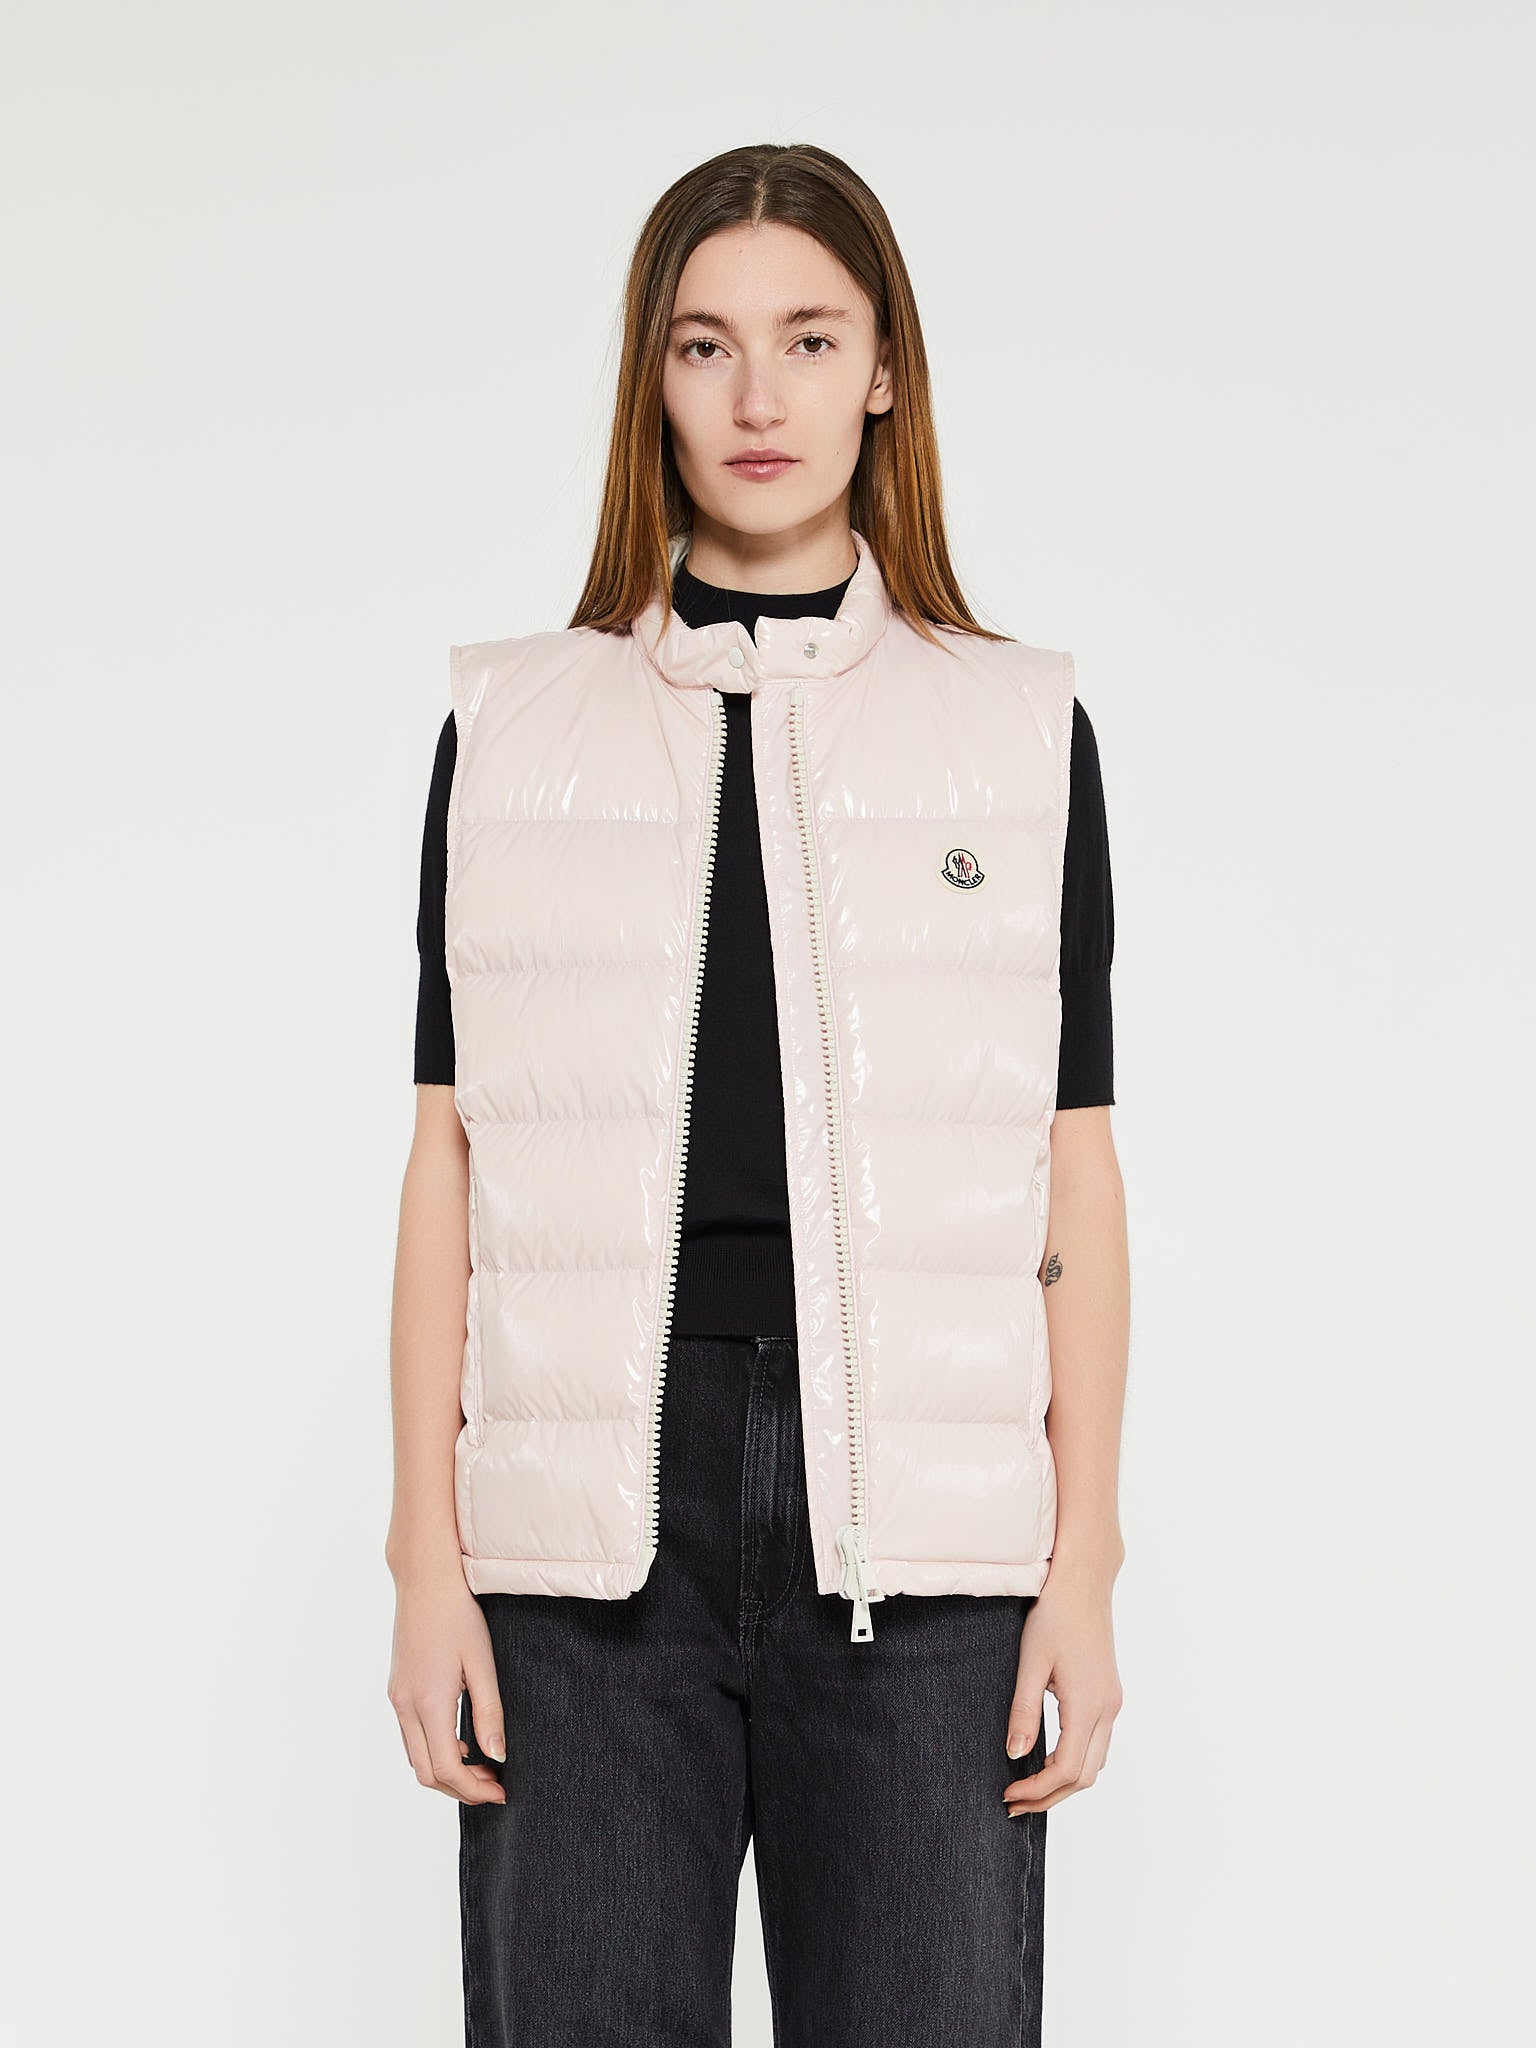 Alcibia Vest in Pink